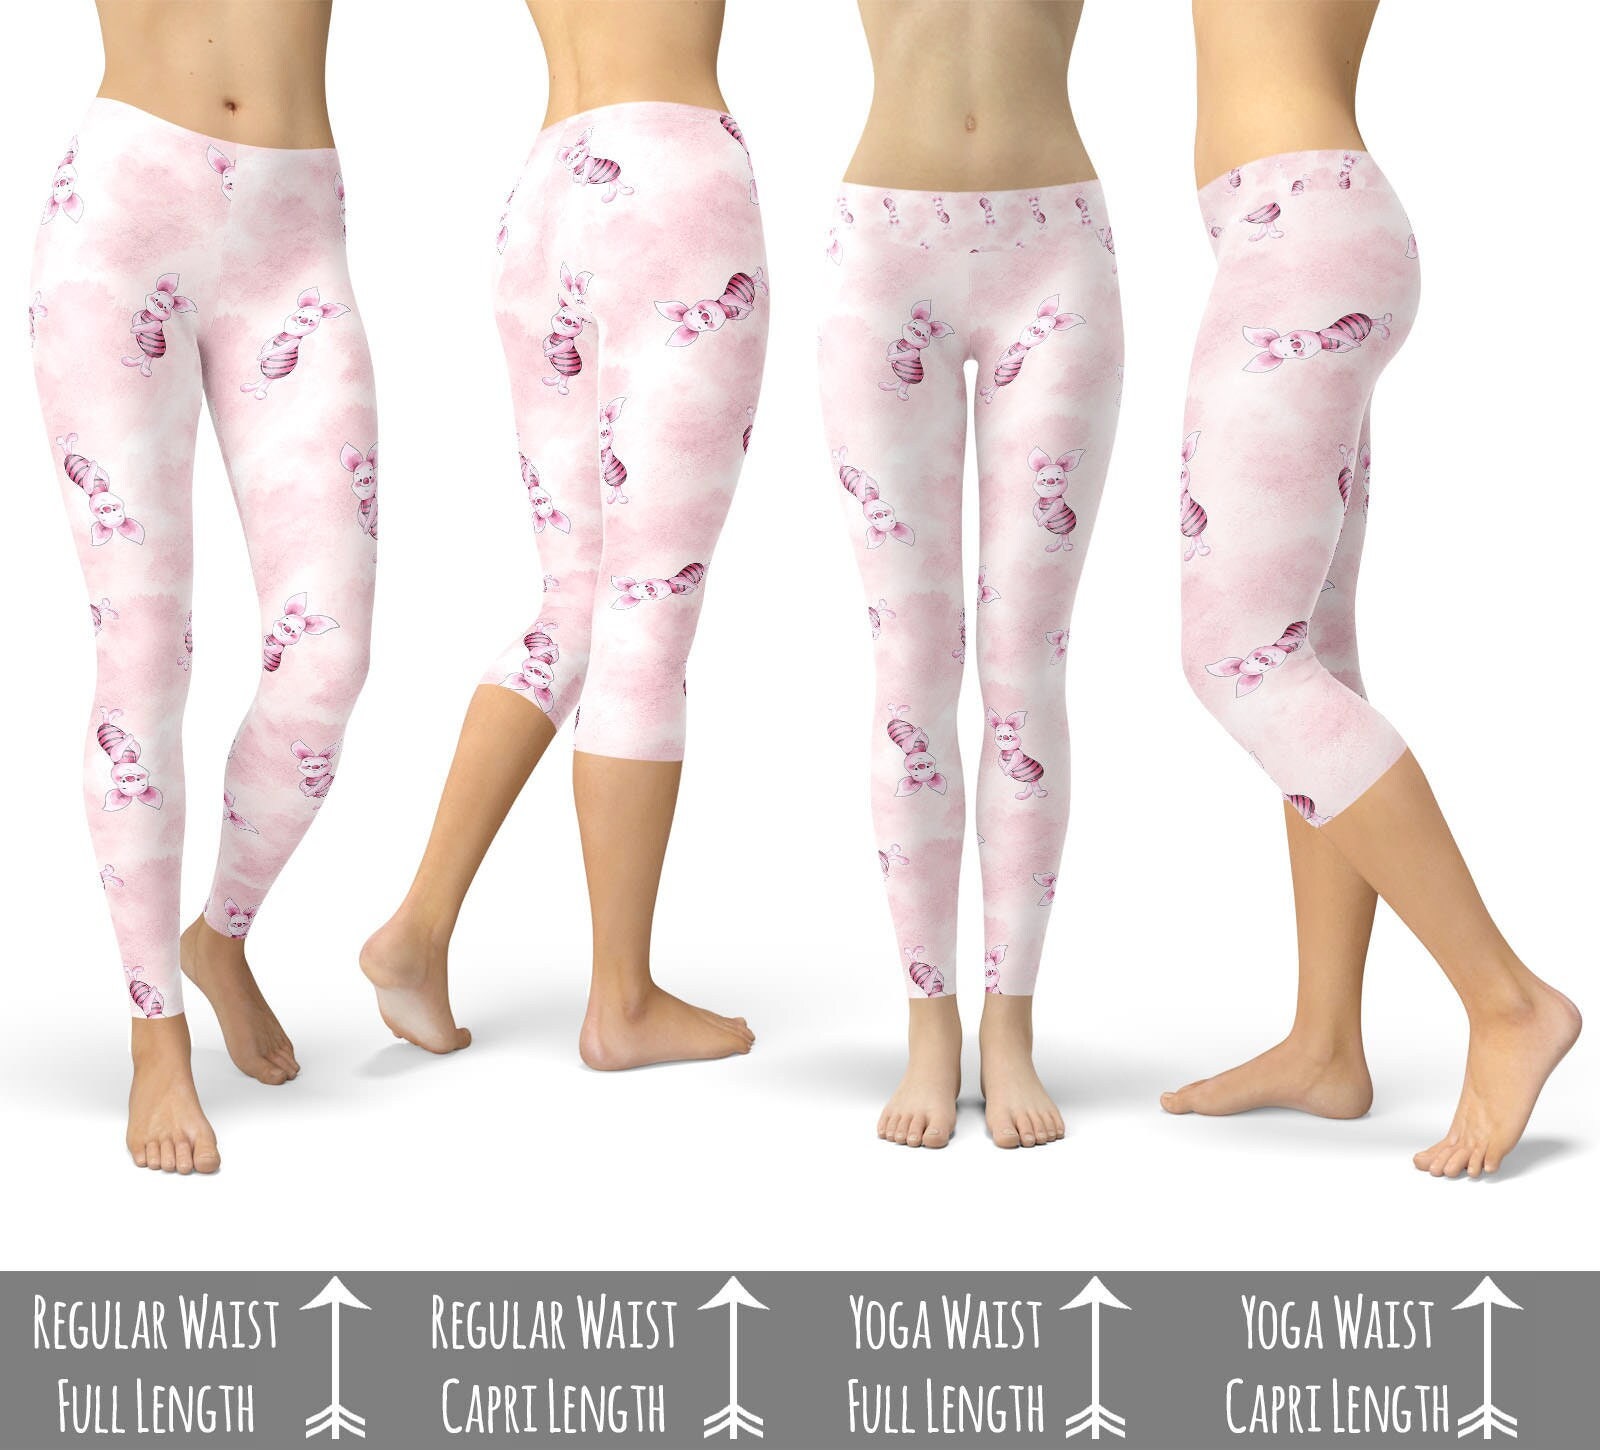 Winnie the Pooh & Friends Sketched Theme Park Inspired Leggings in Capri or  Full Length, Sports Yoga Winter Styles in Sizes XS 5XL 